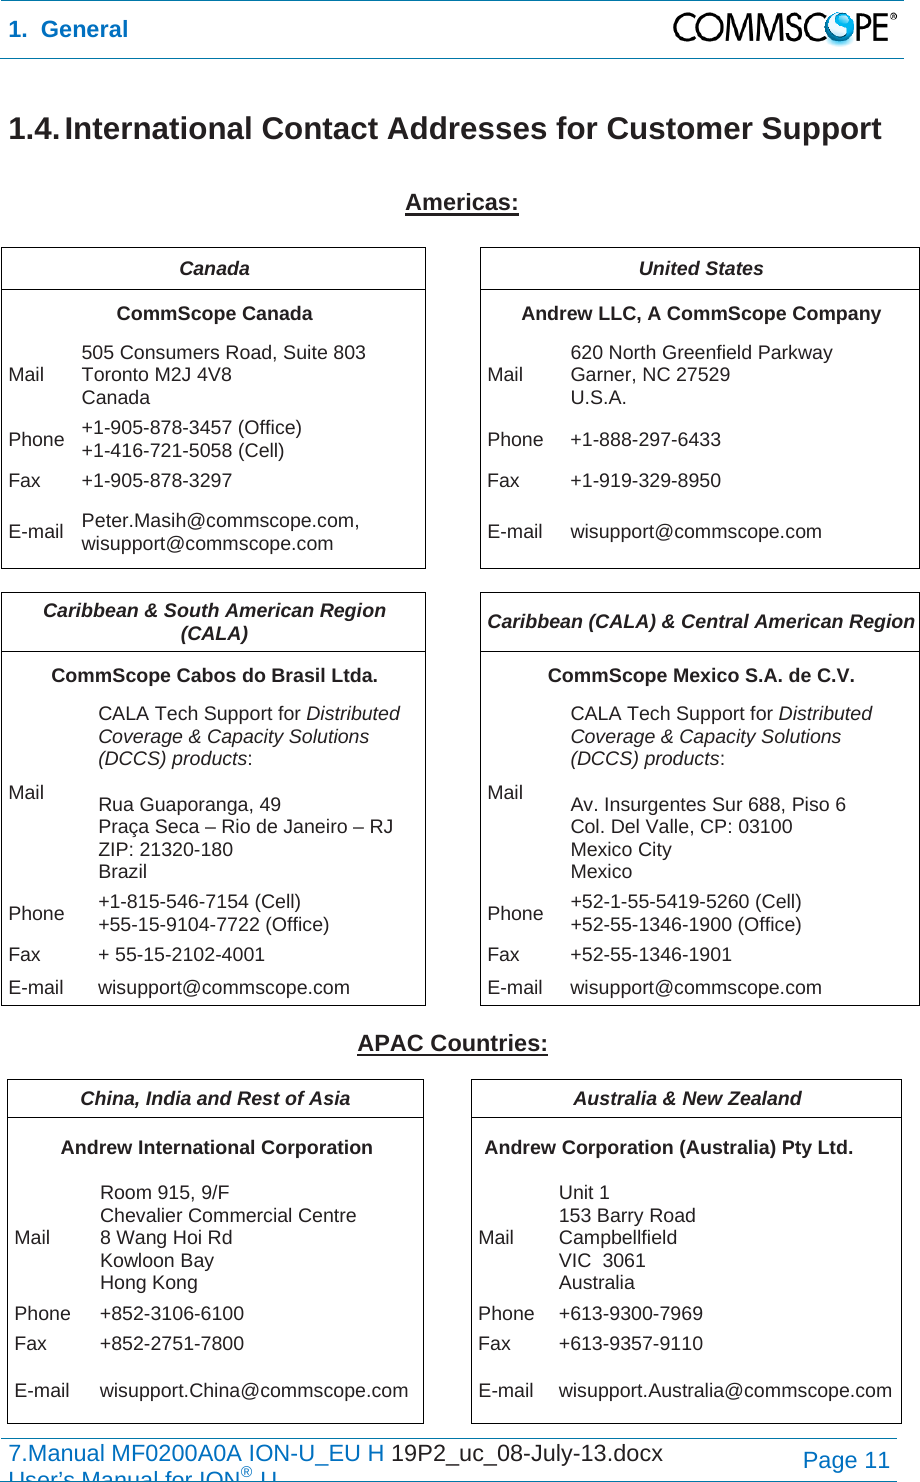 1.  General  7.Manual MF0200A0A ION-U_EU H 19P2_uc_08-July-13.docx   User’s Manual for ION®UPage 11 1.4. International Contact Addresses for Customer Support  Americas:  Canada  United States CommScope Canada  Andrew LLC, A CommScope Company Mail  505 Consumers Road, Suite 803  Toronto M2J 4V8  Canada  Mail  620 North Greenfield Parkway Garner, NC 27529 U.S.A. Phone  +1-905-878-3457 (Office) +1-416-721-5058 (Cell) Phone +1-888-297-6433 Fax +1-905-878-3297  Fax  +1-919-329-8950 E-mail  Peter.Masih@commscope.com, wisupport@commscope.com  E-mail wisupport@commscope.com  Caribbean &amp; South American Region (CALA)  Caribbean (CALA) &amp; Central American Region CommScope Cabos do Brasil Ltda.  CommScope Mexico S.A. de C.V. Mail CALA Tech Support for Distributed Coverage &amp; Capacity Solutions (DCCS) products:  Rua Guaporanga, 49 Praça Seca – Rio de Janeiro – RJ ZIP: 21320-180 Brazil Mail CALA Tech Support for Distributed Coverage &amp; Capacity Solutions (DCCS) products:  Av. Insurgentes Sur 688, Piso 6 Col. Del Valle, CP: 03100 Mexico City Mexico Phone  +1-815-546-7154 (Cell) +55-15-9104-7722 (Office)  Phone  +52-1-55-5419-5260 (Cell) +52-55-1346-1900 (Office) Fax + 55-15-2102-4001  Fax +52-55-1346-1901 E-mail wisupport@commscope.com  E-mail wisupport@commscope.com  APAC Countries:  China, India and Rest of Asia  Australia &amp; New Zealand Andrew International Corporation  Andrew Corporation (Australia) Pty Ltd. Mail Room 915, 9/F  Chevalier Commercial Centre 8 Wang Hoi Rd Kowloon Bay  Hong Kong Mail Unit 1 153 Barry Road Campbellfield  VIC  3061 Australia Phone +852-3106-6100  Phone +613-9300-7969 Fax +852-2751-7800  Fax +613-9357-9110 E-mail wisupport.China@commscope.com E-mail wisupport.Australia@commscope.com